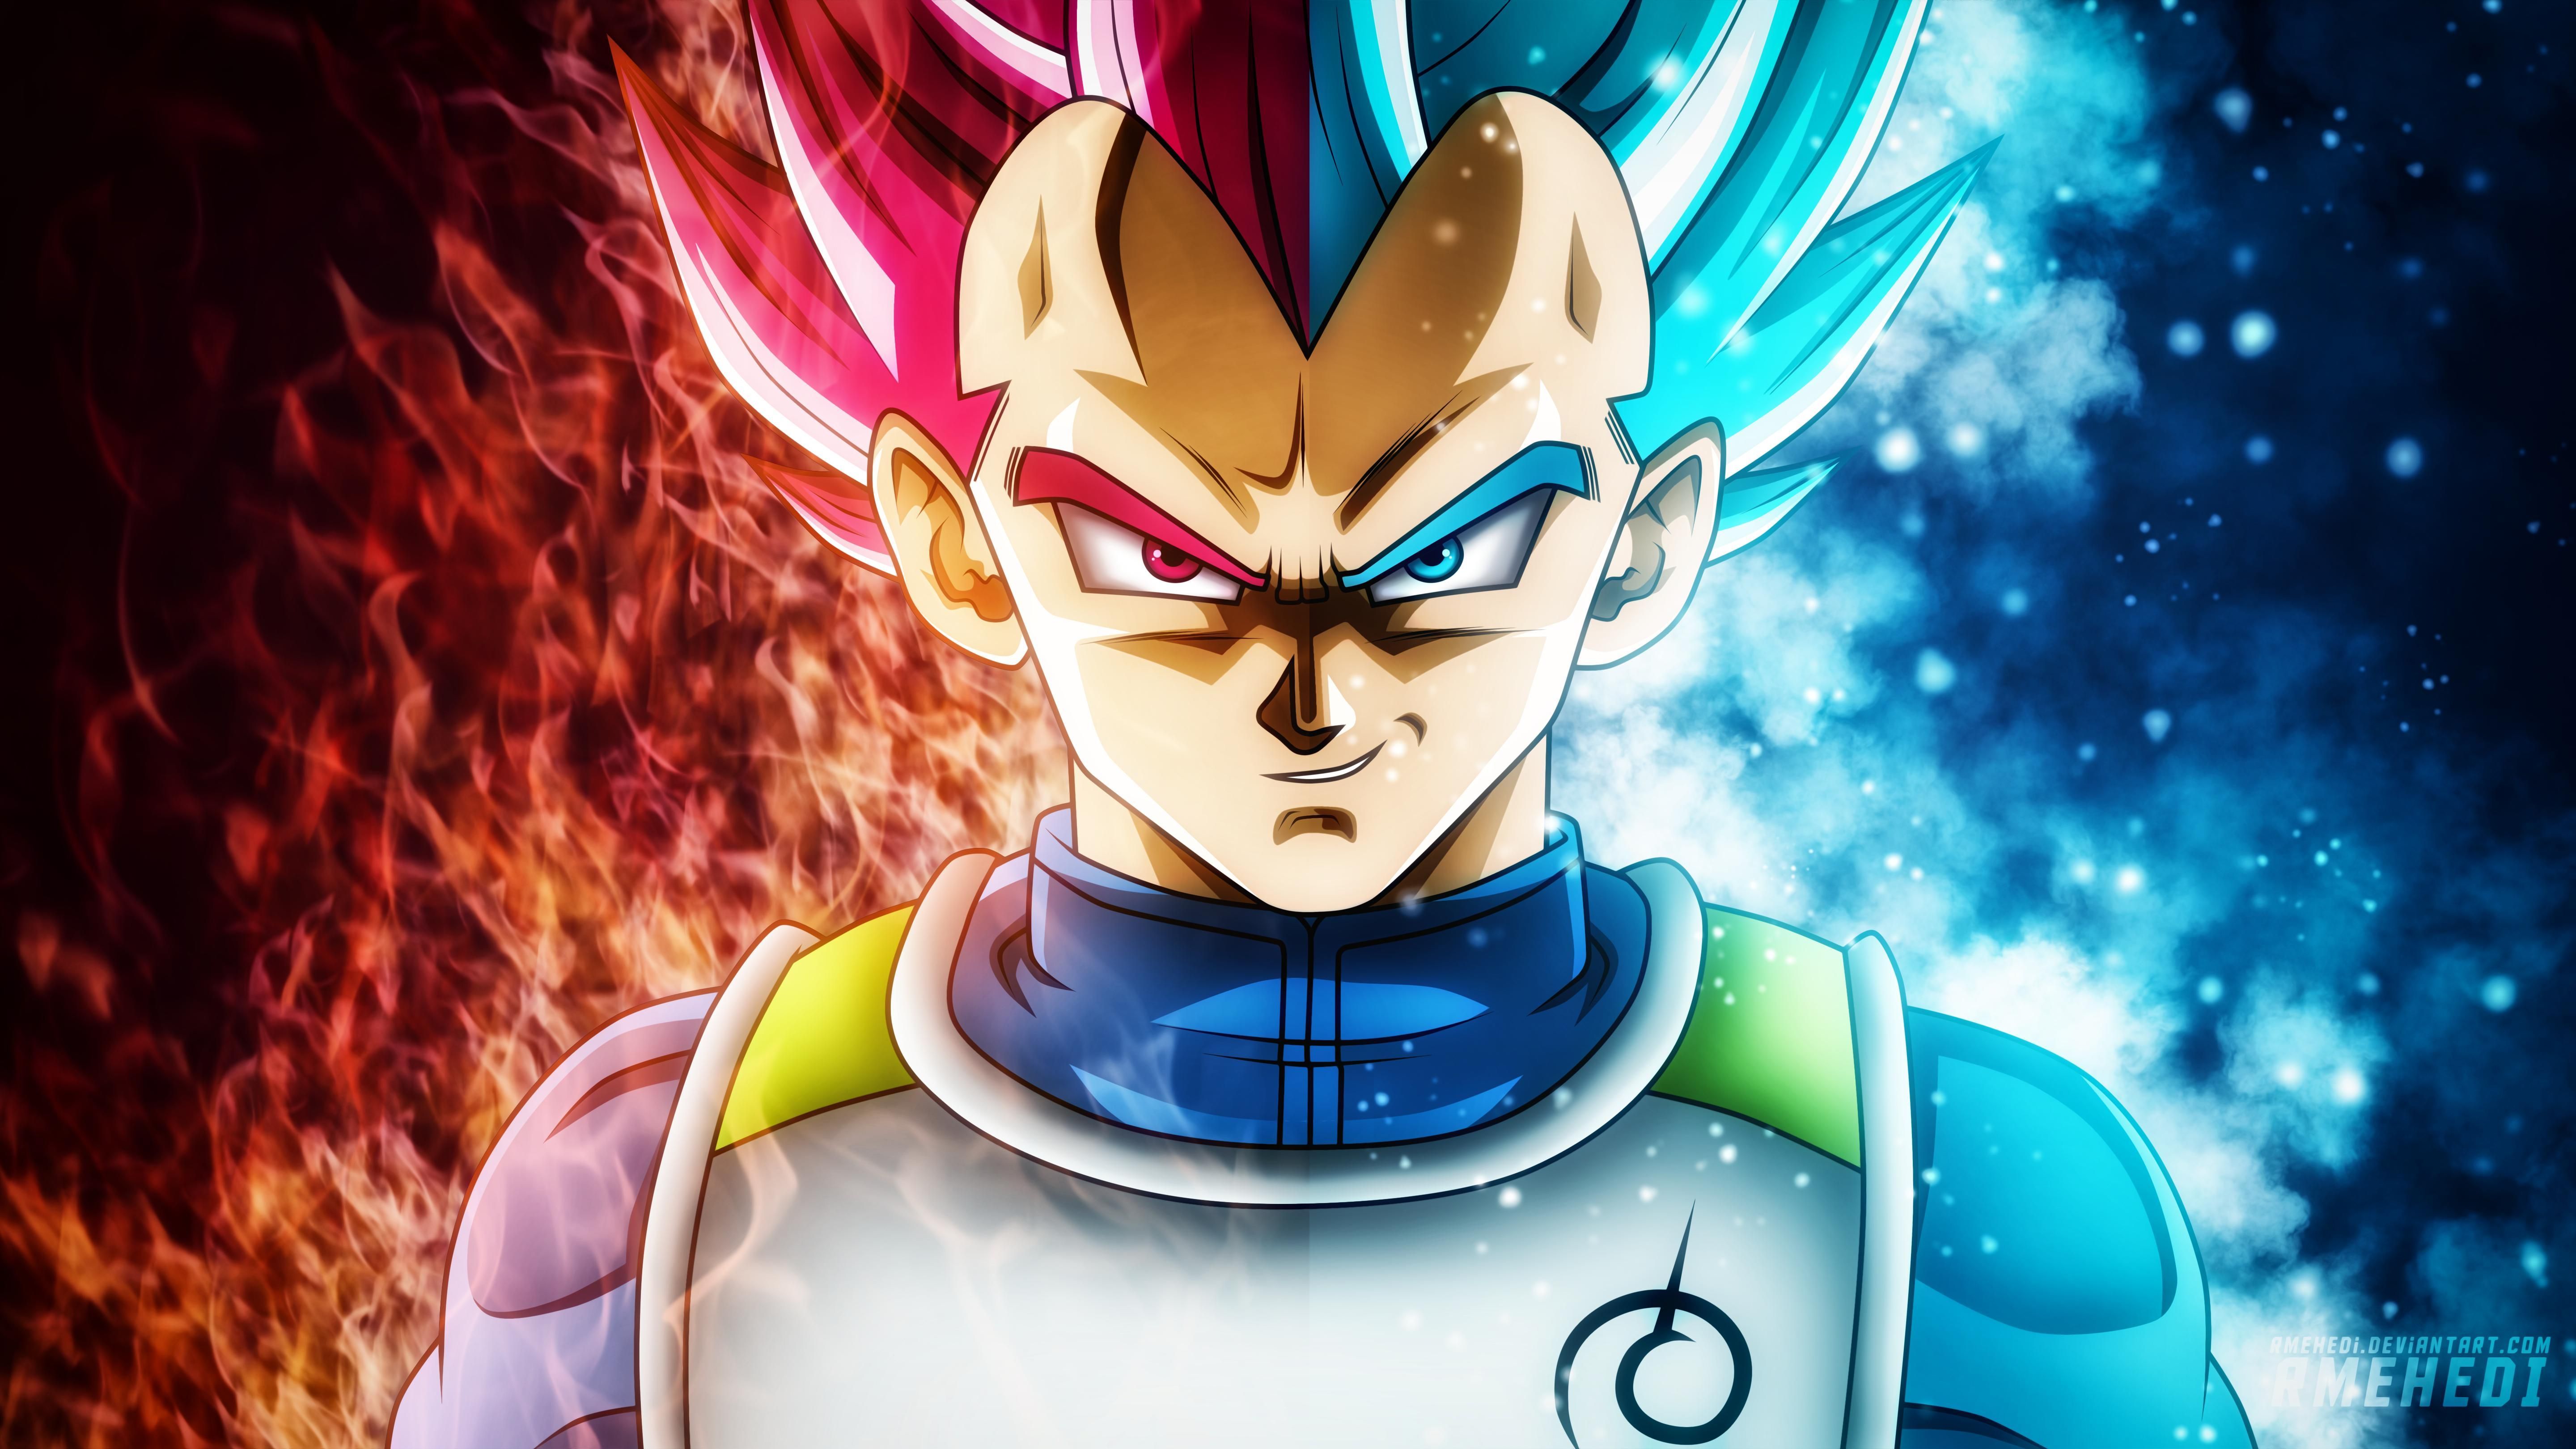 Dragon Ball Super Wallpapers High Definition On Wallpapers 1080p HD